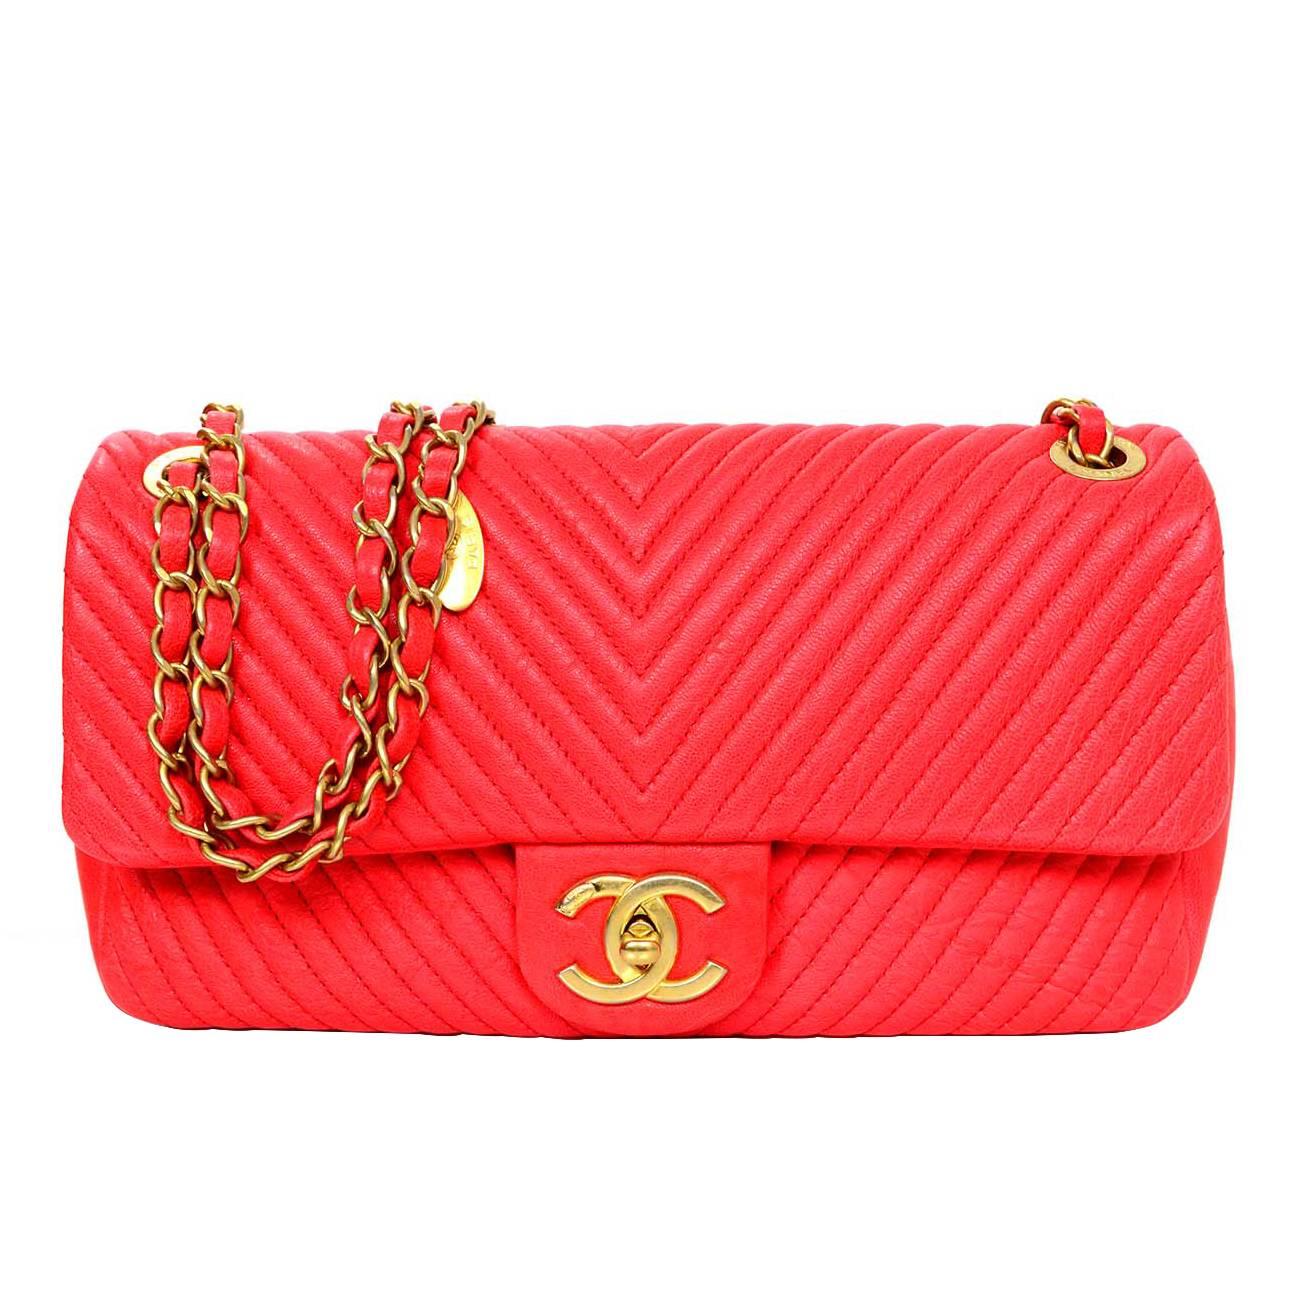 Chanel Coral Wrinkled Chevron Leather Flap Bag